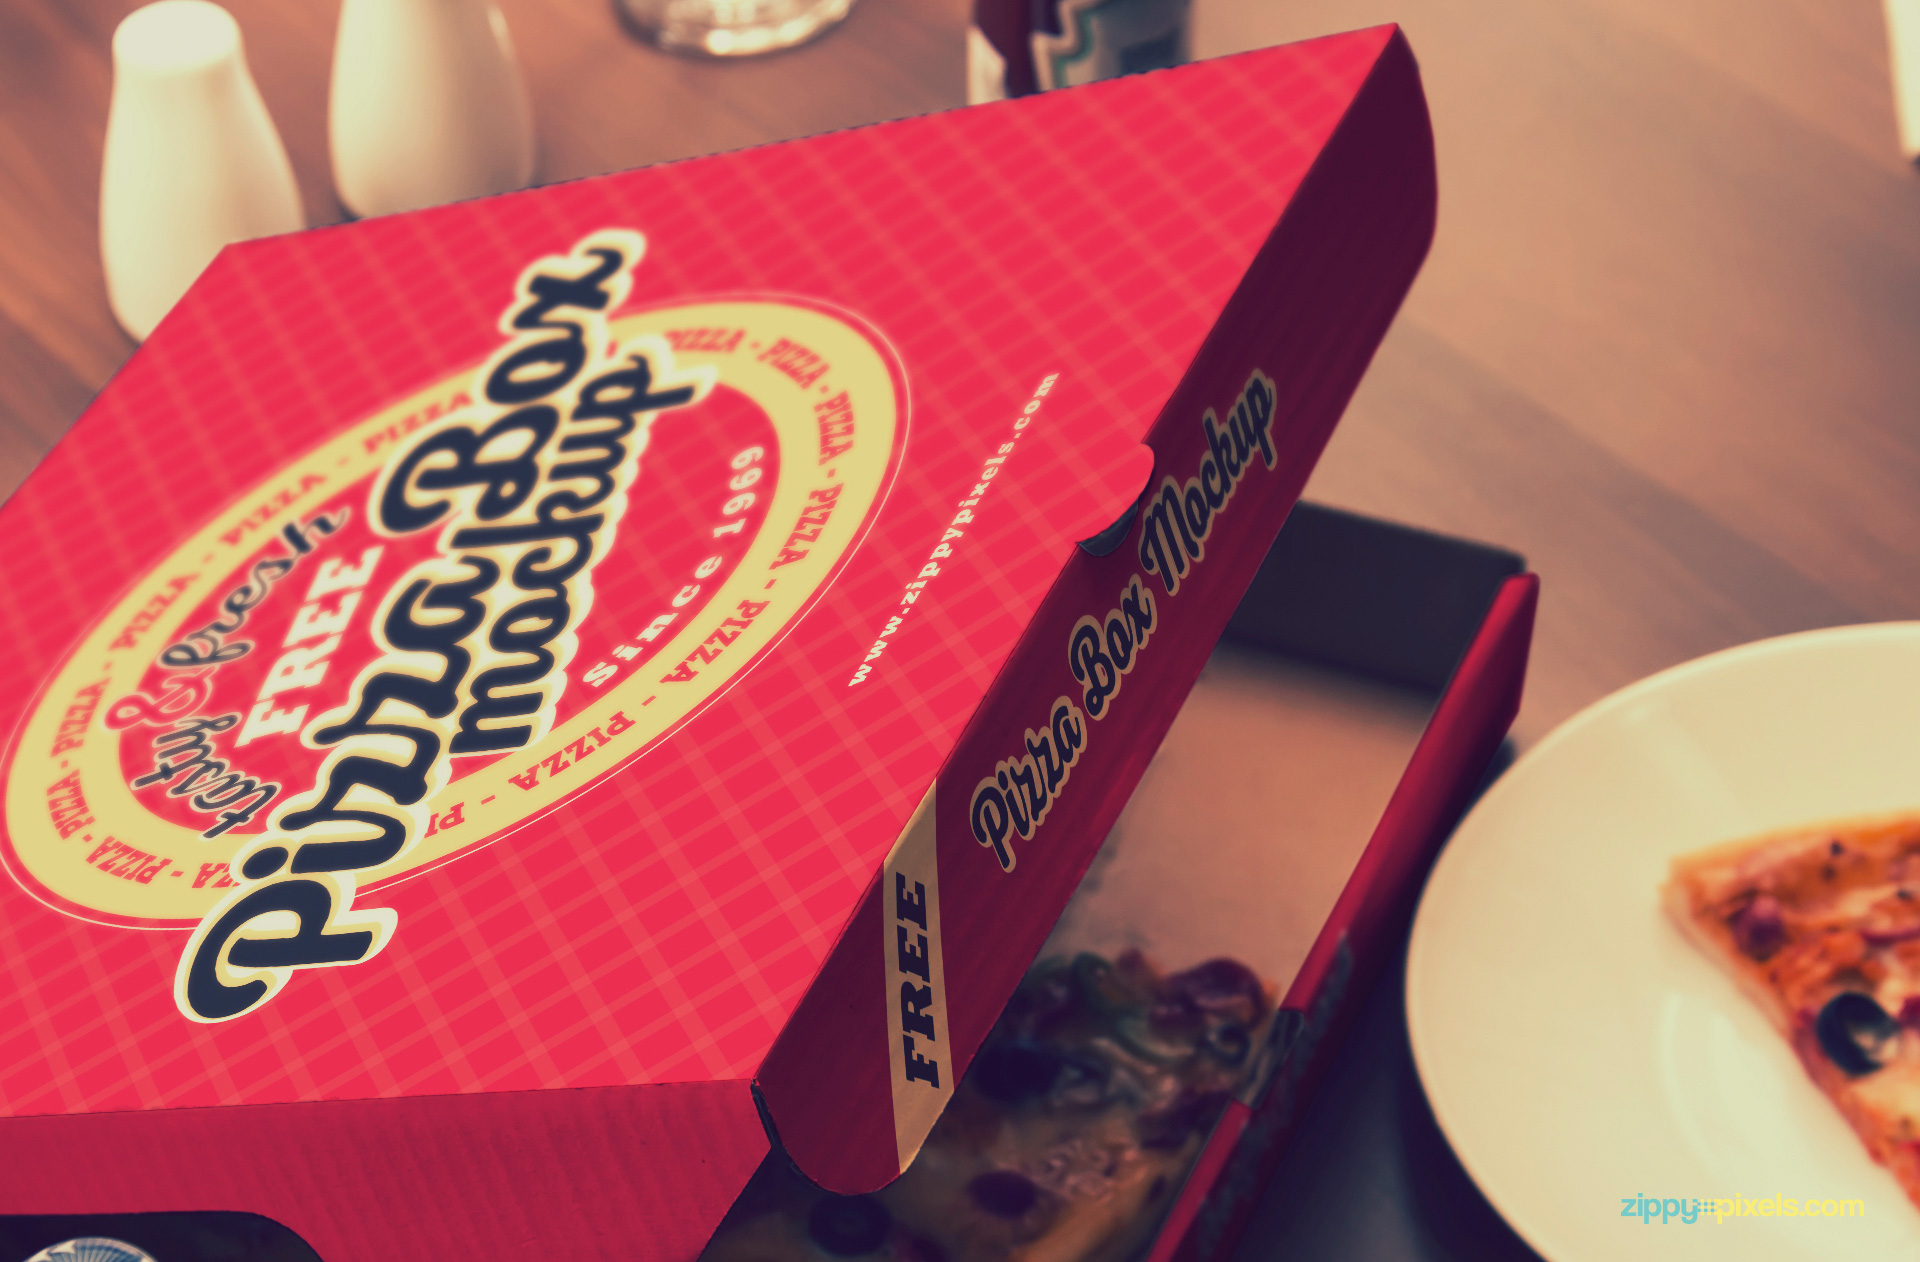 Use Adobe Photoshop to edit the top and side of the pizza box.